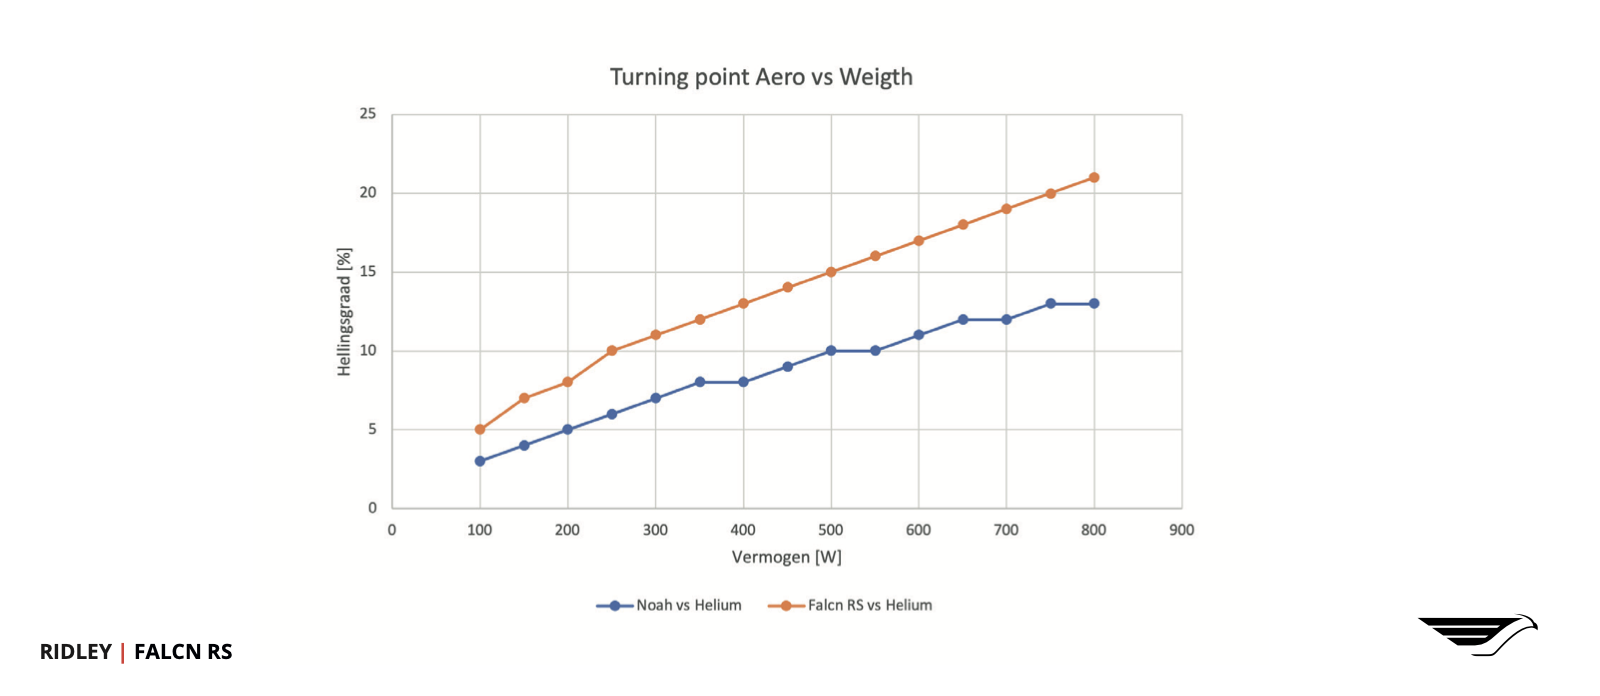 A graphic of Ridley's claimed "turning point," or gradient where weight concerns begin to outweigh aerodynamics. There are two lines: the red is the Falcn RS vs the Helium, and the blue is the Noah vs the Helium. The Falcn has a consistently higher "turning point" that separates further on steeper gradients.